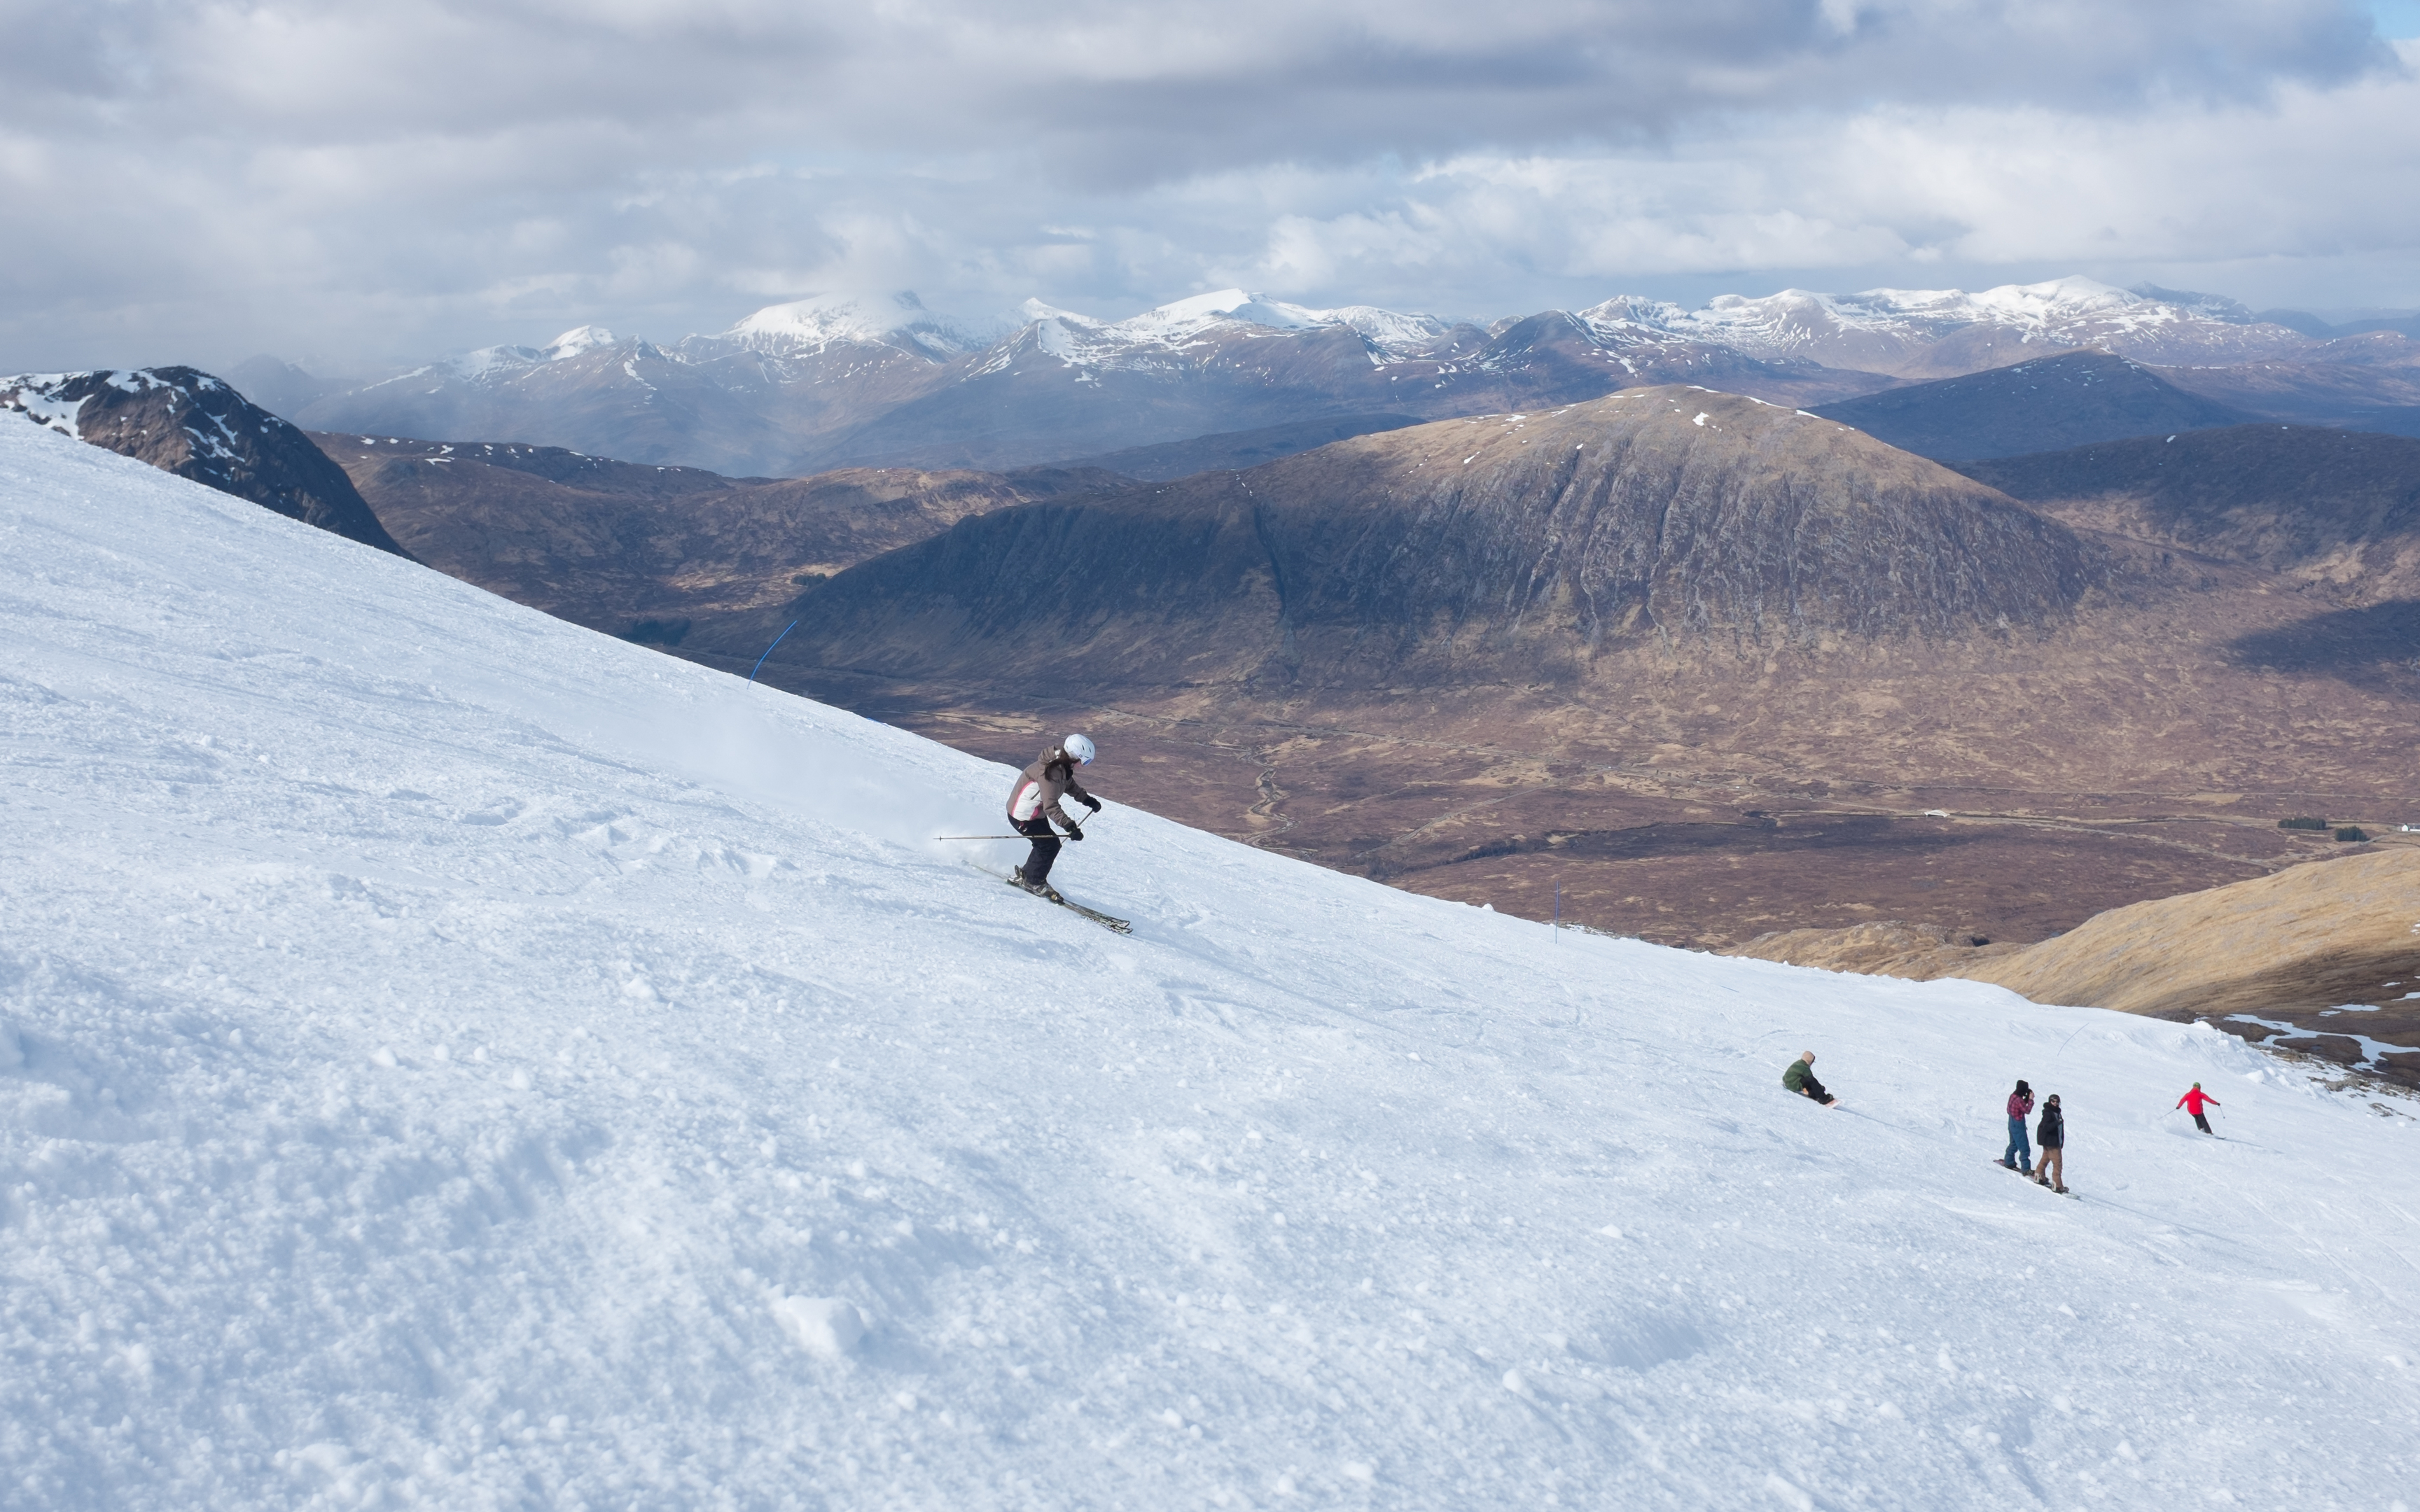 Glencoe ski area has marked the longest day of the year with a burst of mid-summer winter sports